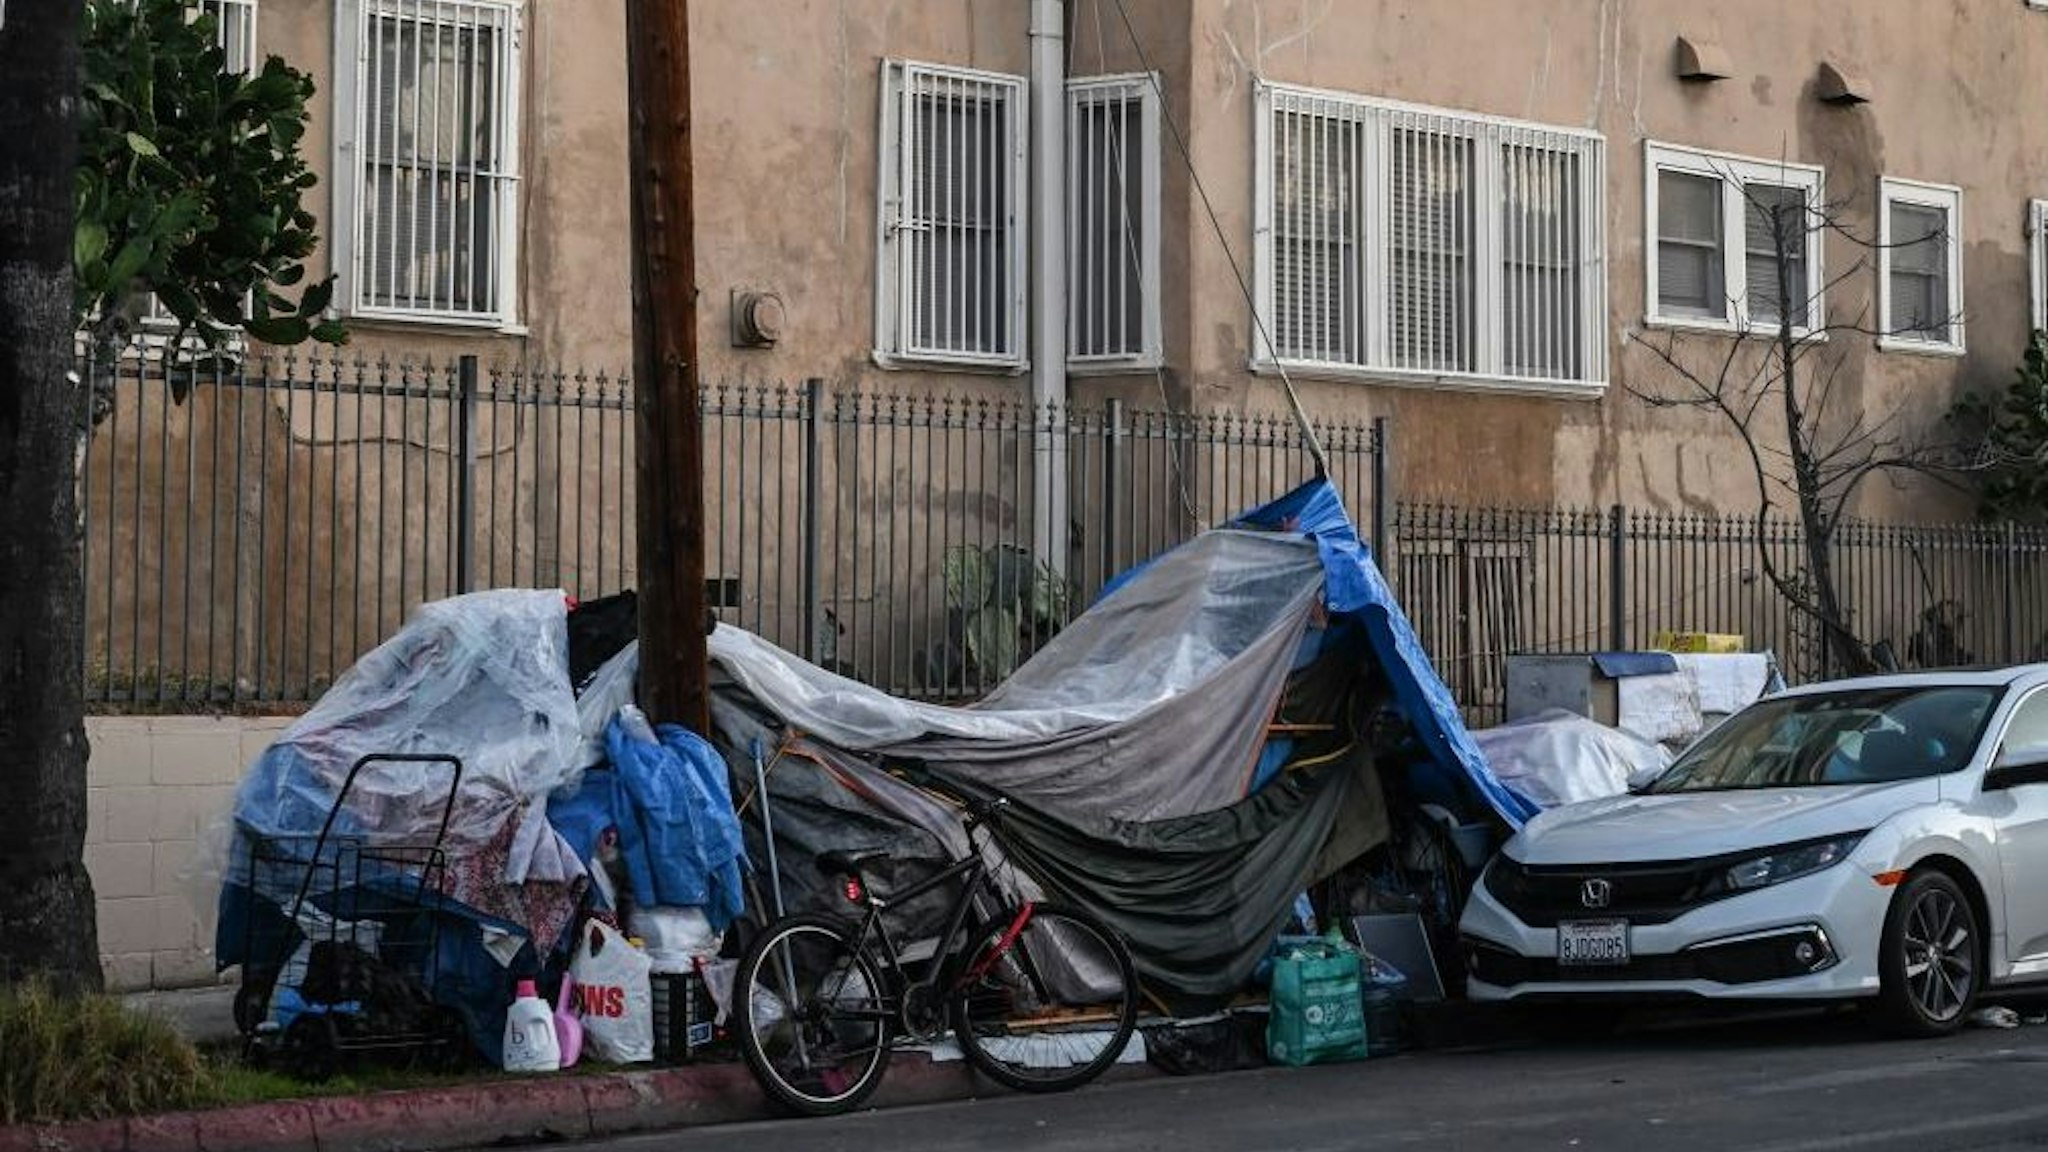 Tents sheltering homeless people line a residential street in Los Angeles, California, December 9, 2019. - At the behest of Los Angeles and local governments across the west, the US Supreme Court is considering a ruling by the 9th Circuit Court of Appeals that requires cities to allow people to sleep in public places including sidewalks as long as there are not enough public shelter beds for every person in need. Over half a million people in the US are homeless on a single night, according to a report released in September by the White House's The Council of Economic Advisers.